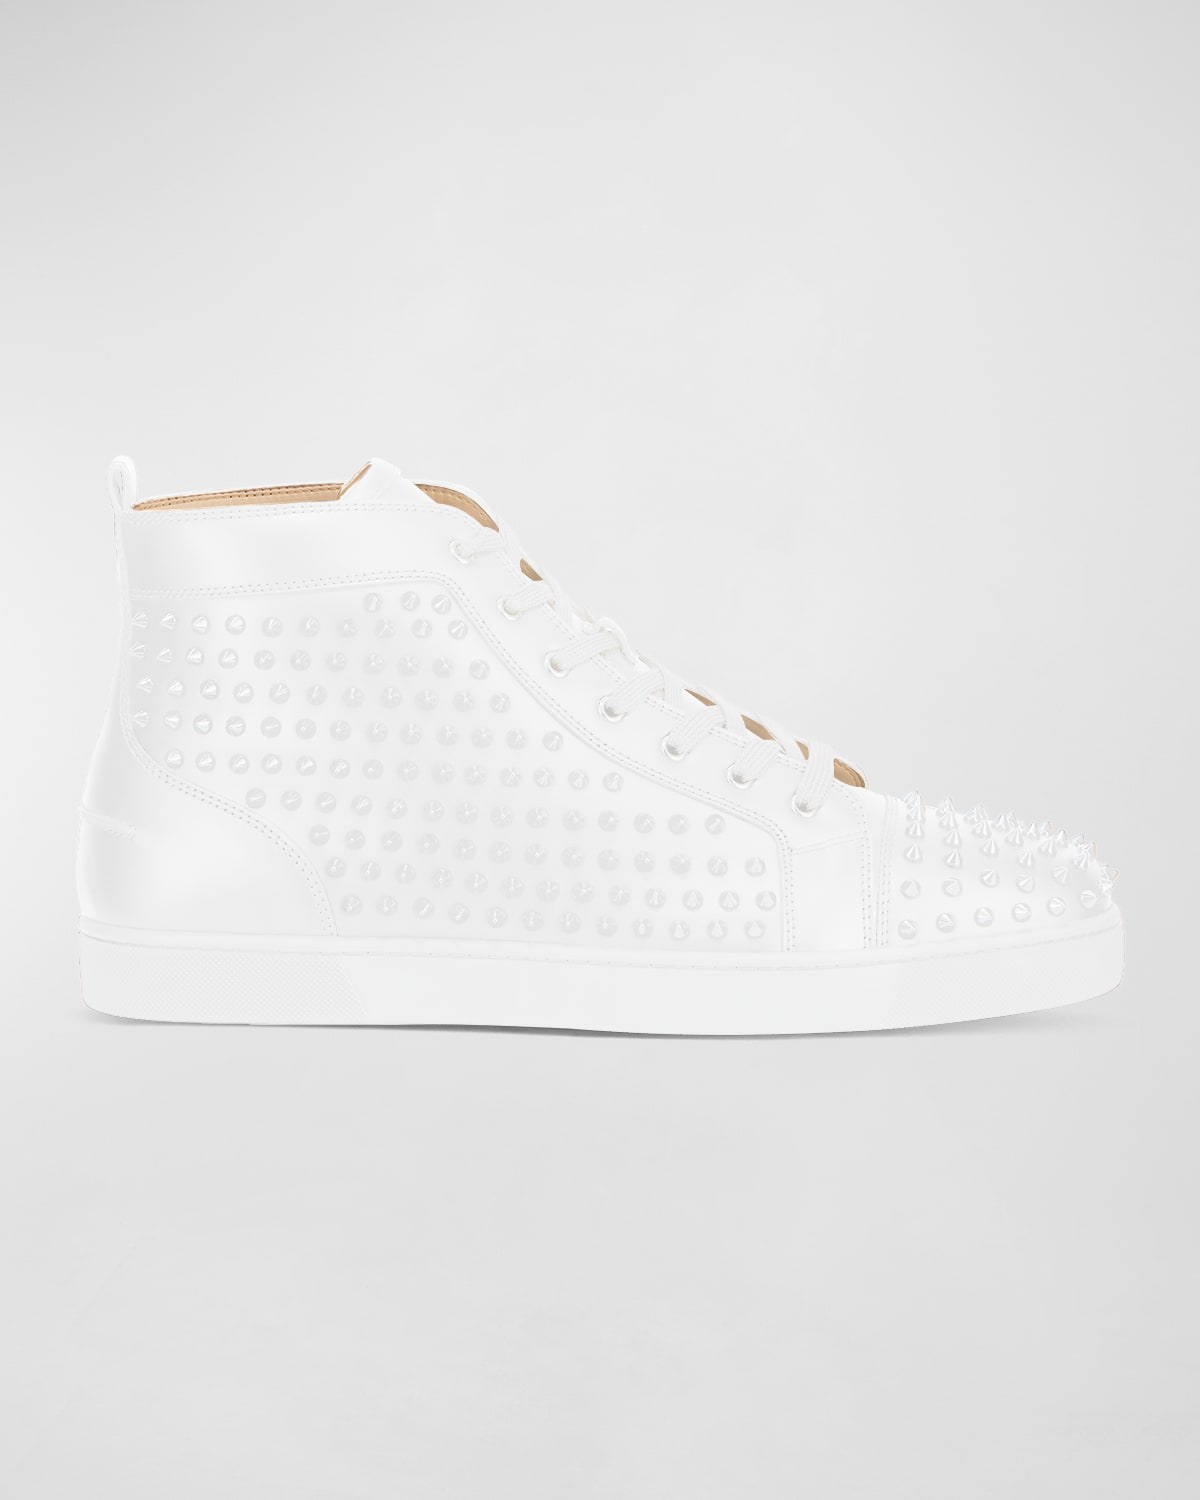 Christian Louboutin Men's Louis Mid-top Spiked Leather Sneakers In White